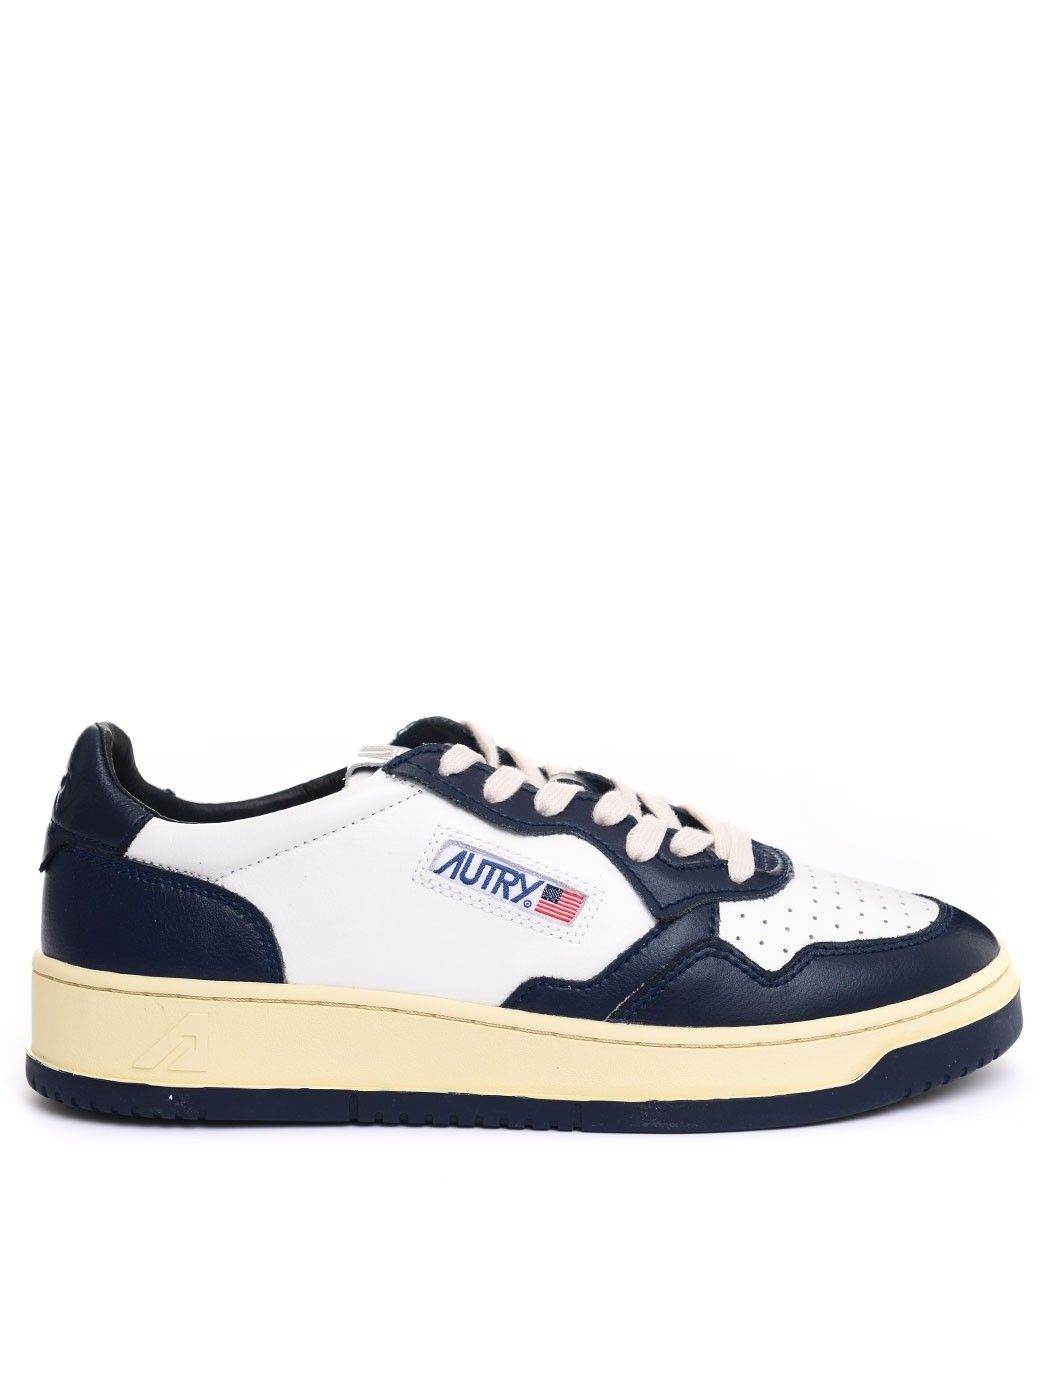  MAN SHOES,SPRING SUMMER SHOES,CHURCH'S SHOES,DIADORA HERITAGE SHOES,DIADORA HERITAGE SNEAKERS,GOLDEN GOOSE SHOES,GOLDEN GOOSE SNEAKERS  AUTRY AULM